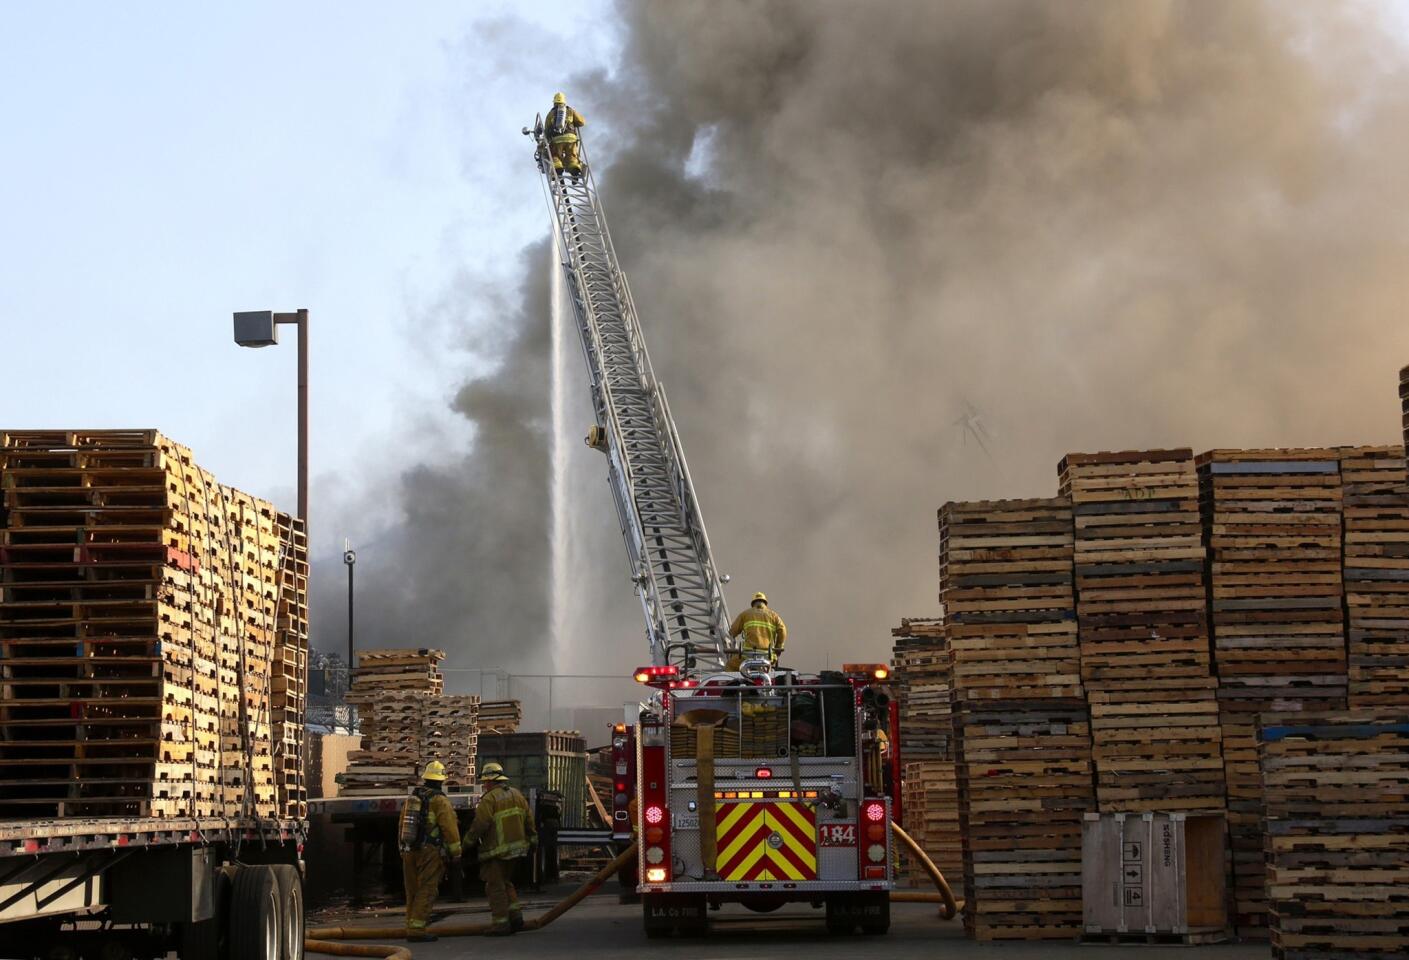 Firefighters work to extinguish a fire at a recycling business in Pomona on Wednesday morning.